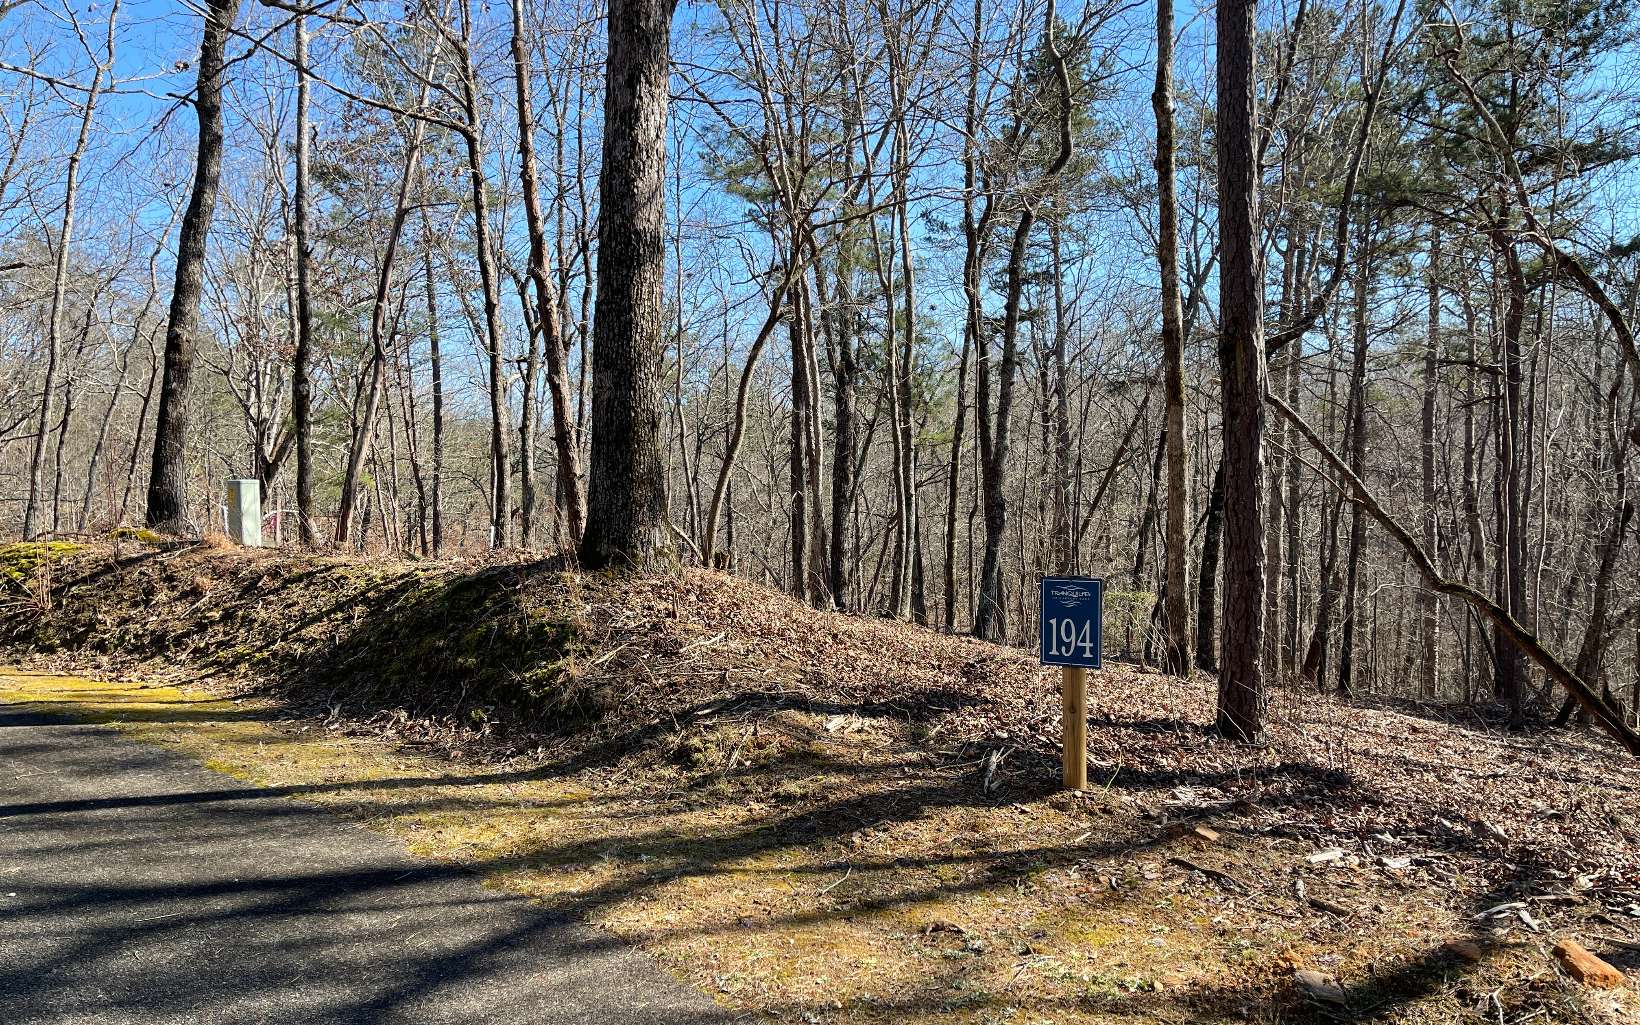 Located in the upscale community of Tranquility at Carters Lake, this gentle laying 1.04ac lot sits at the end of cul-de-sac for extra privacy. Featuring hardwoods & a portion of Harris Creek on the backside, this lot would make the perfect place to build your forever home with a minimum sqft of 1,600. Wide paved roads make this community a great place for walking, with a beautiful common area/park with a covered pavilion w/ stone accents, picnic tables, restrooms, playground & creek side swings! Carters Lake recreation area & public boat launch near by!! Must see in person to appreciate the 'tranquility' of this community! Adjoining Lot 193 also for sale!